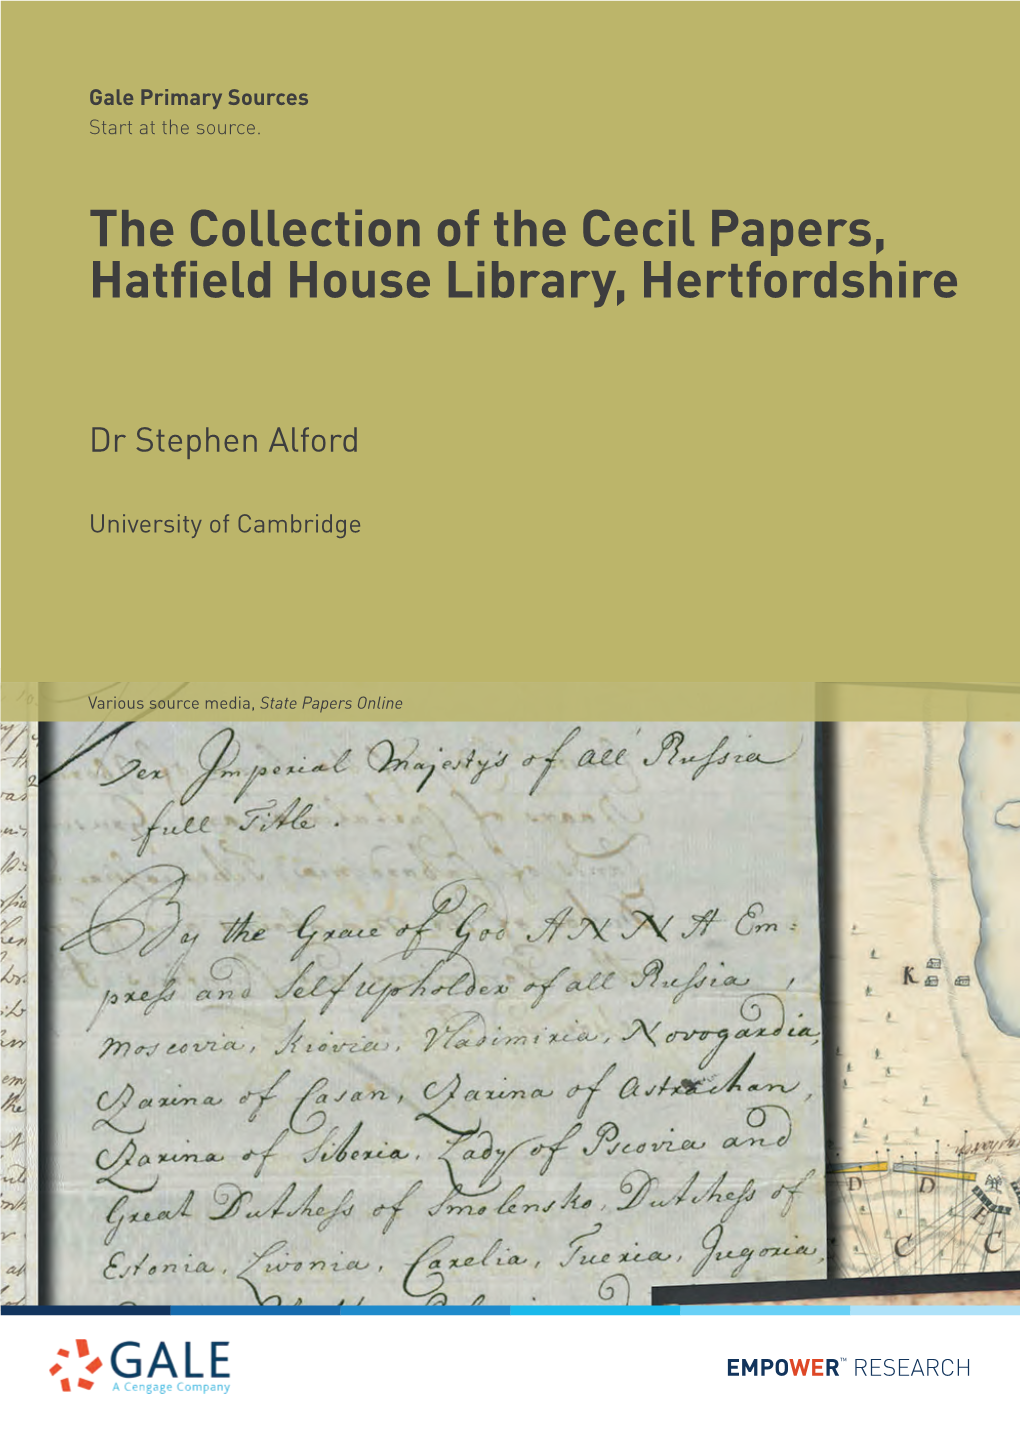 The Collection of the Cecil Papers, Hatfield House Library, Hertfordshire